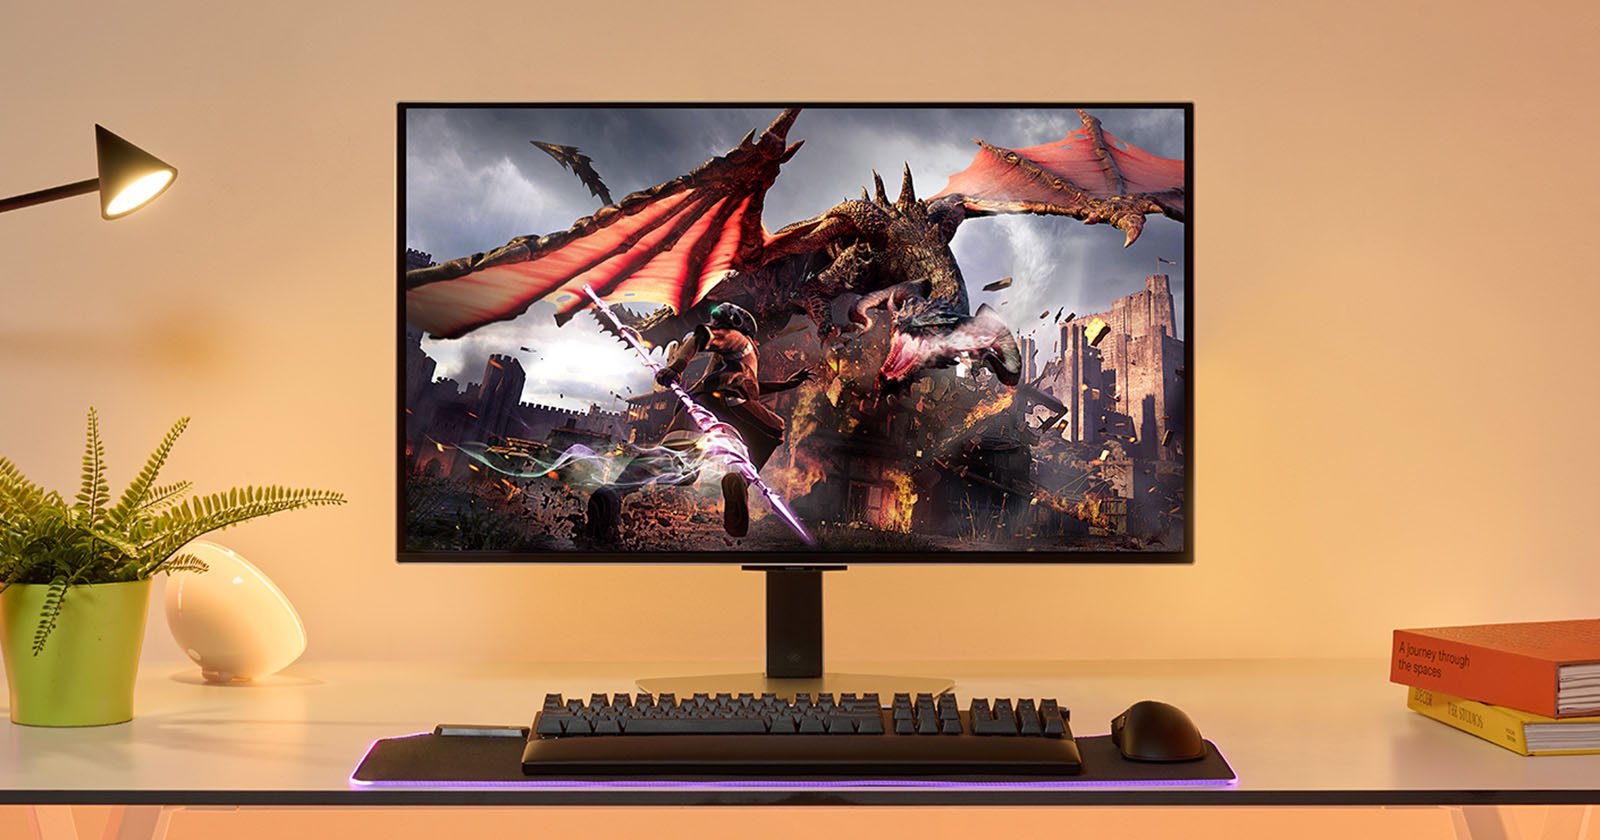 Samsung Updates Three of Its Monitor Series Built for Creatives and Gamers